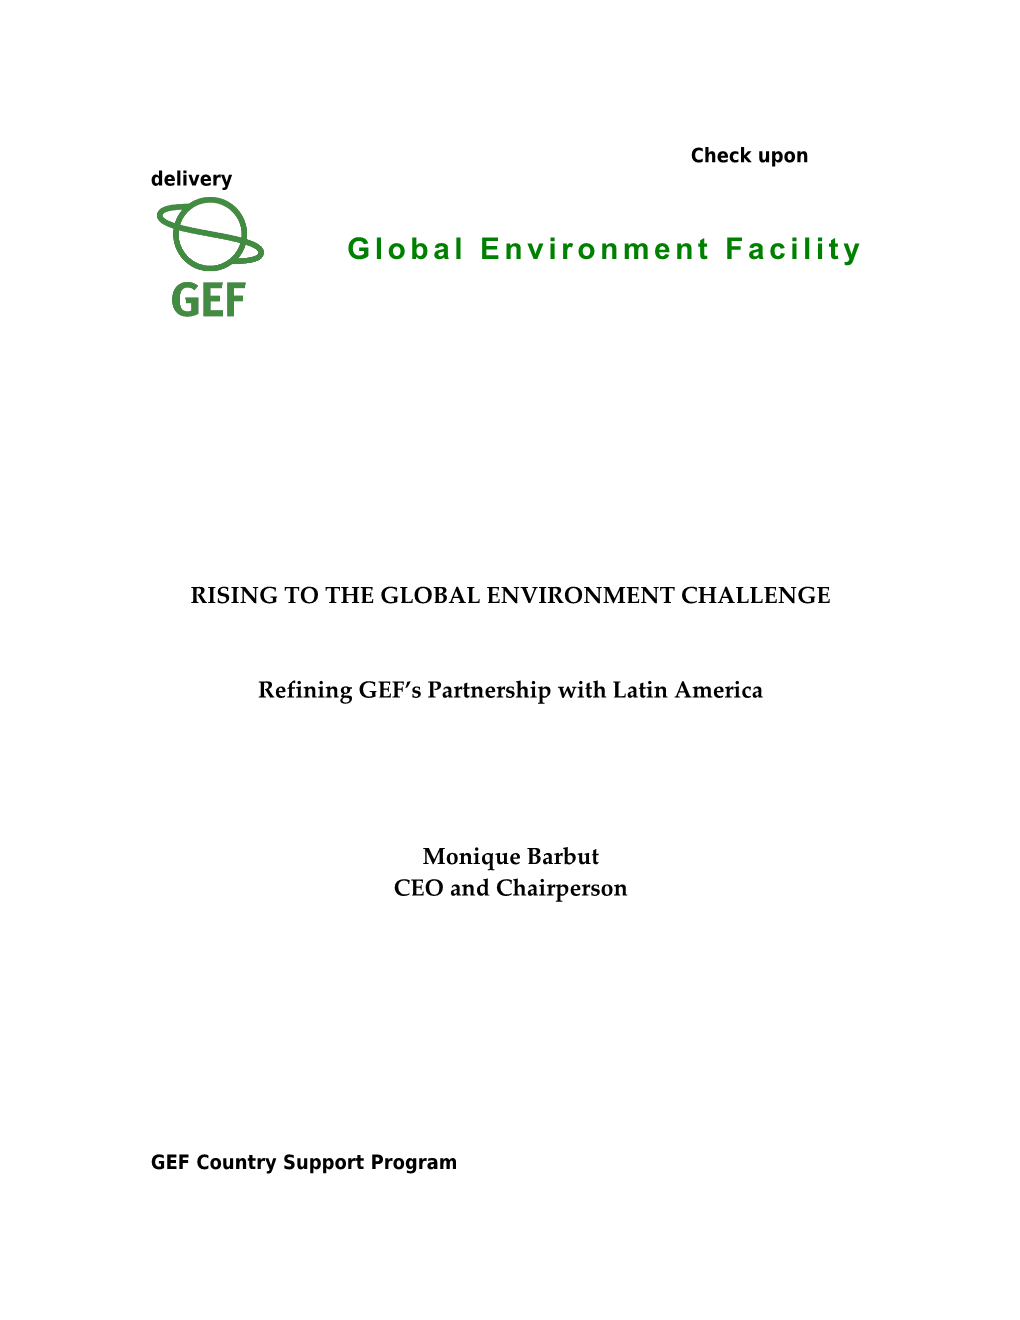 Rising to the Global Environment Challenge